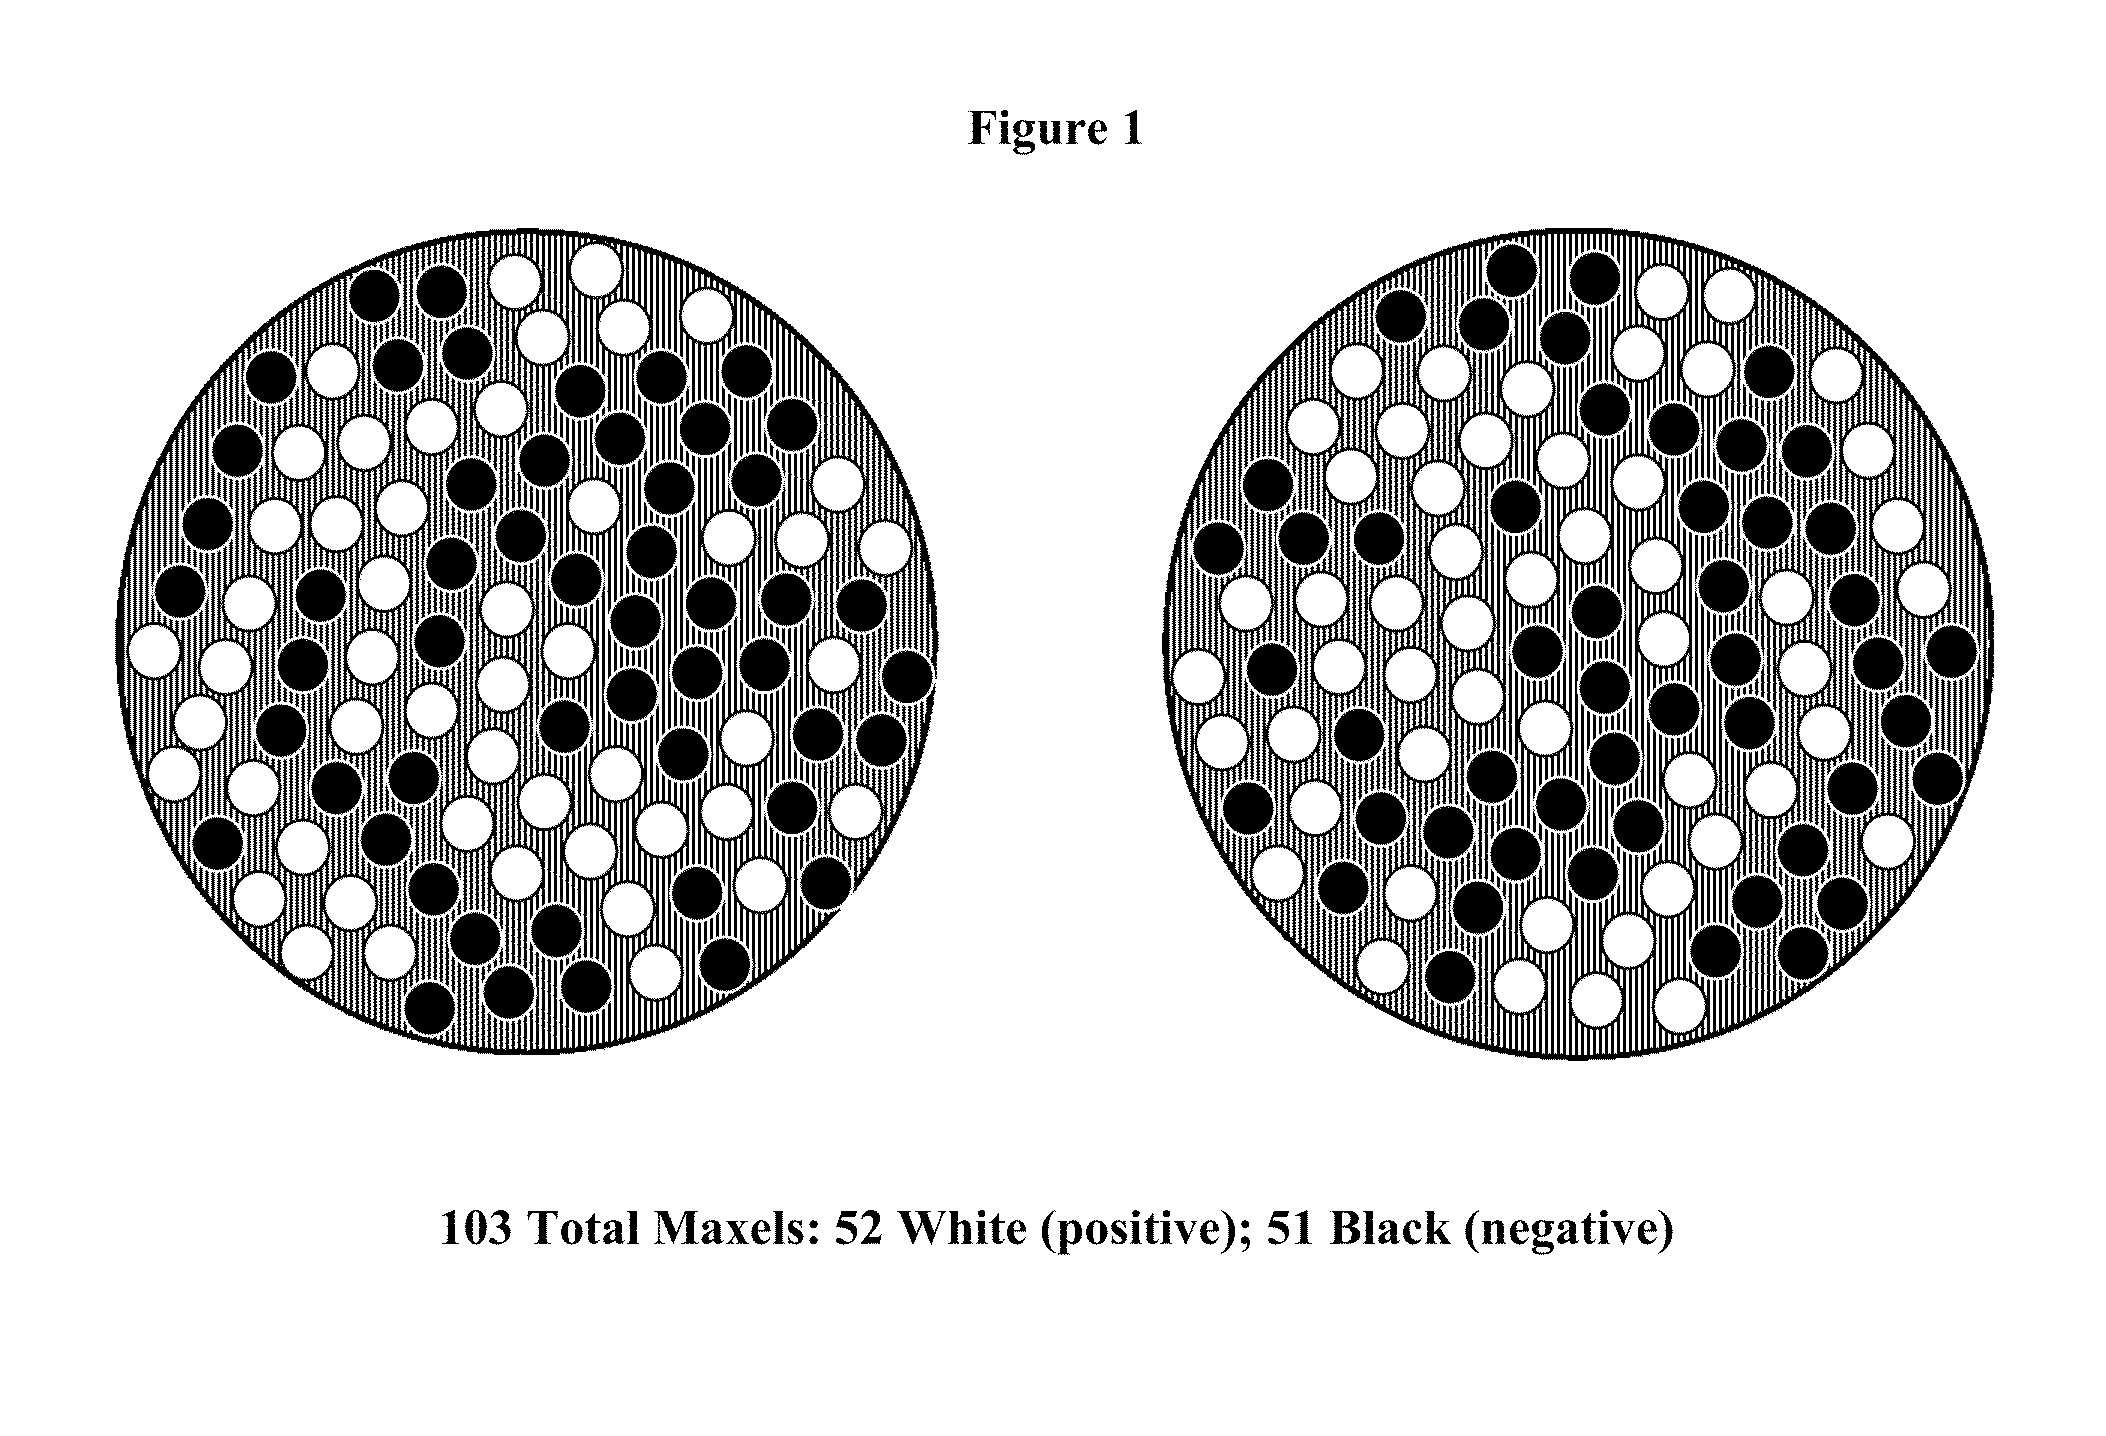 Periodic correlated magnetic actuator systems and methods of use thereof